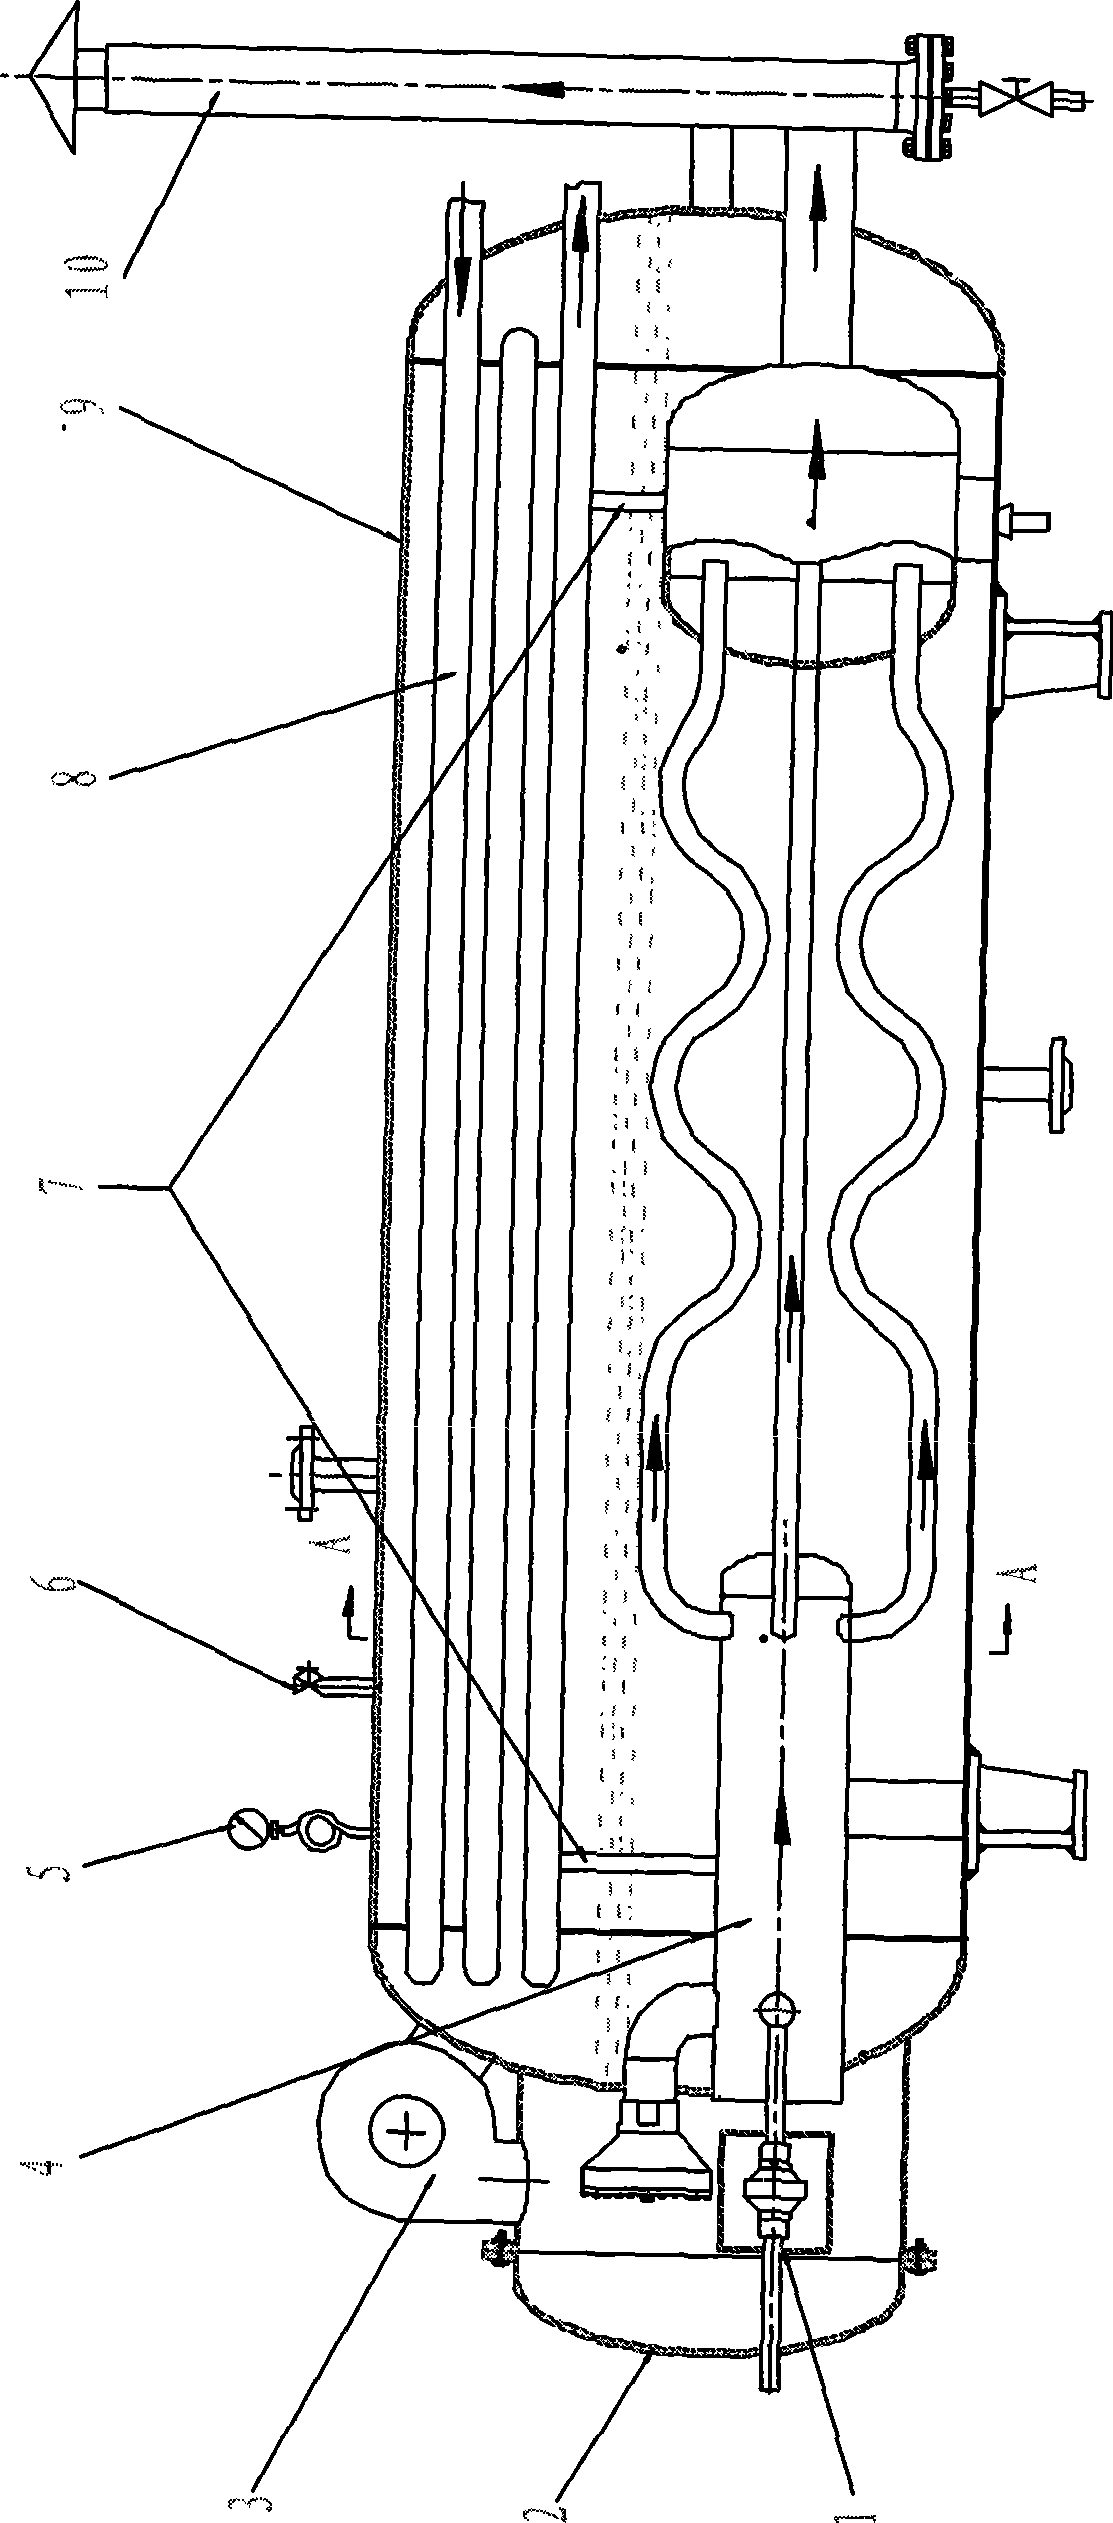 Heat-exchange intensification apparatus and method for indirect medium heating furnace